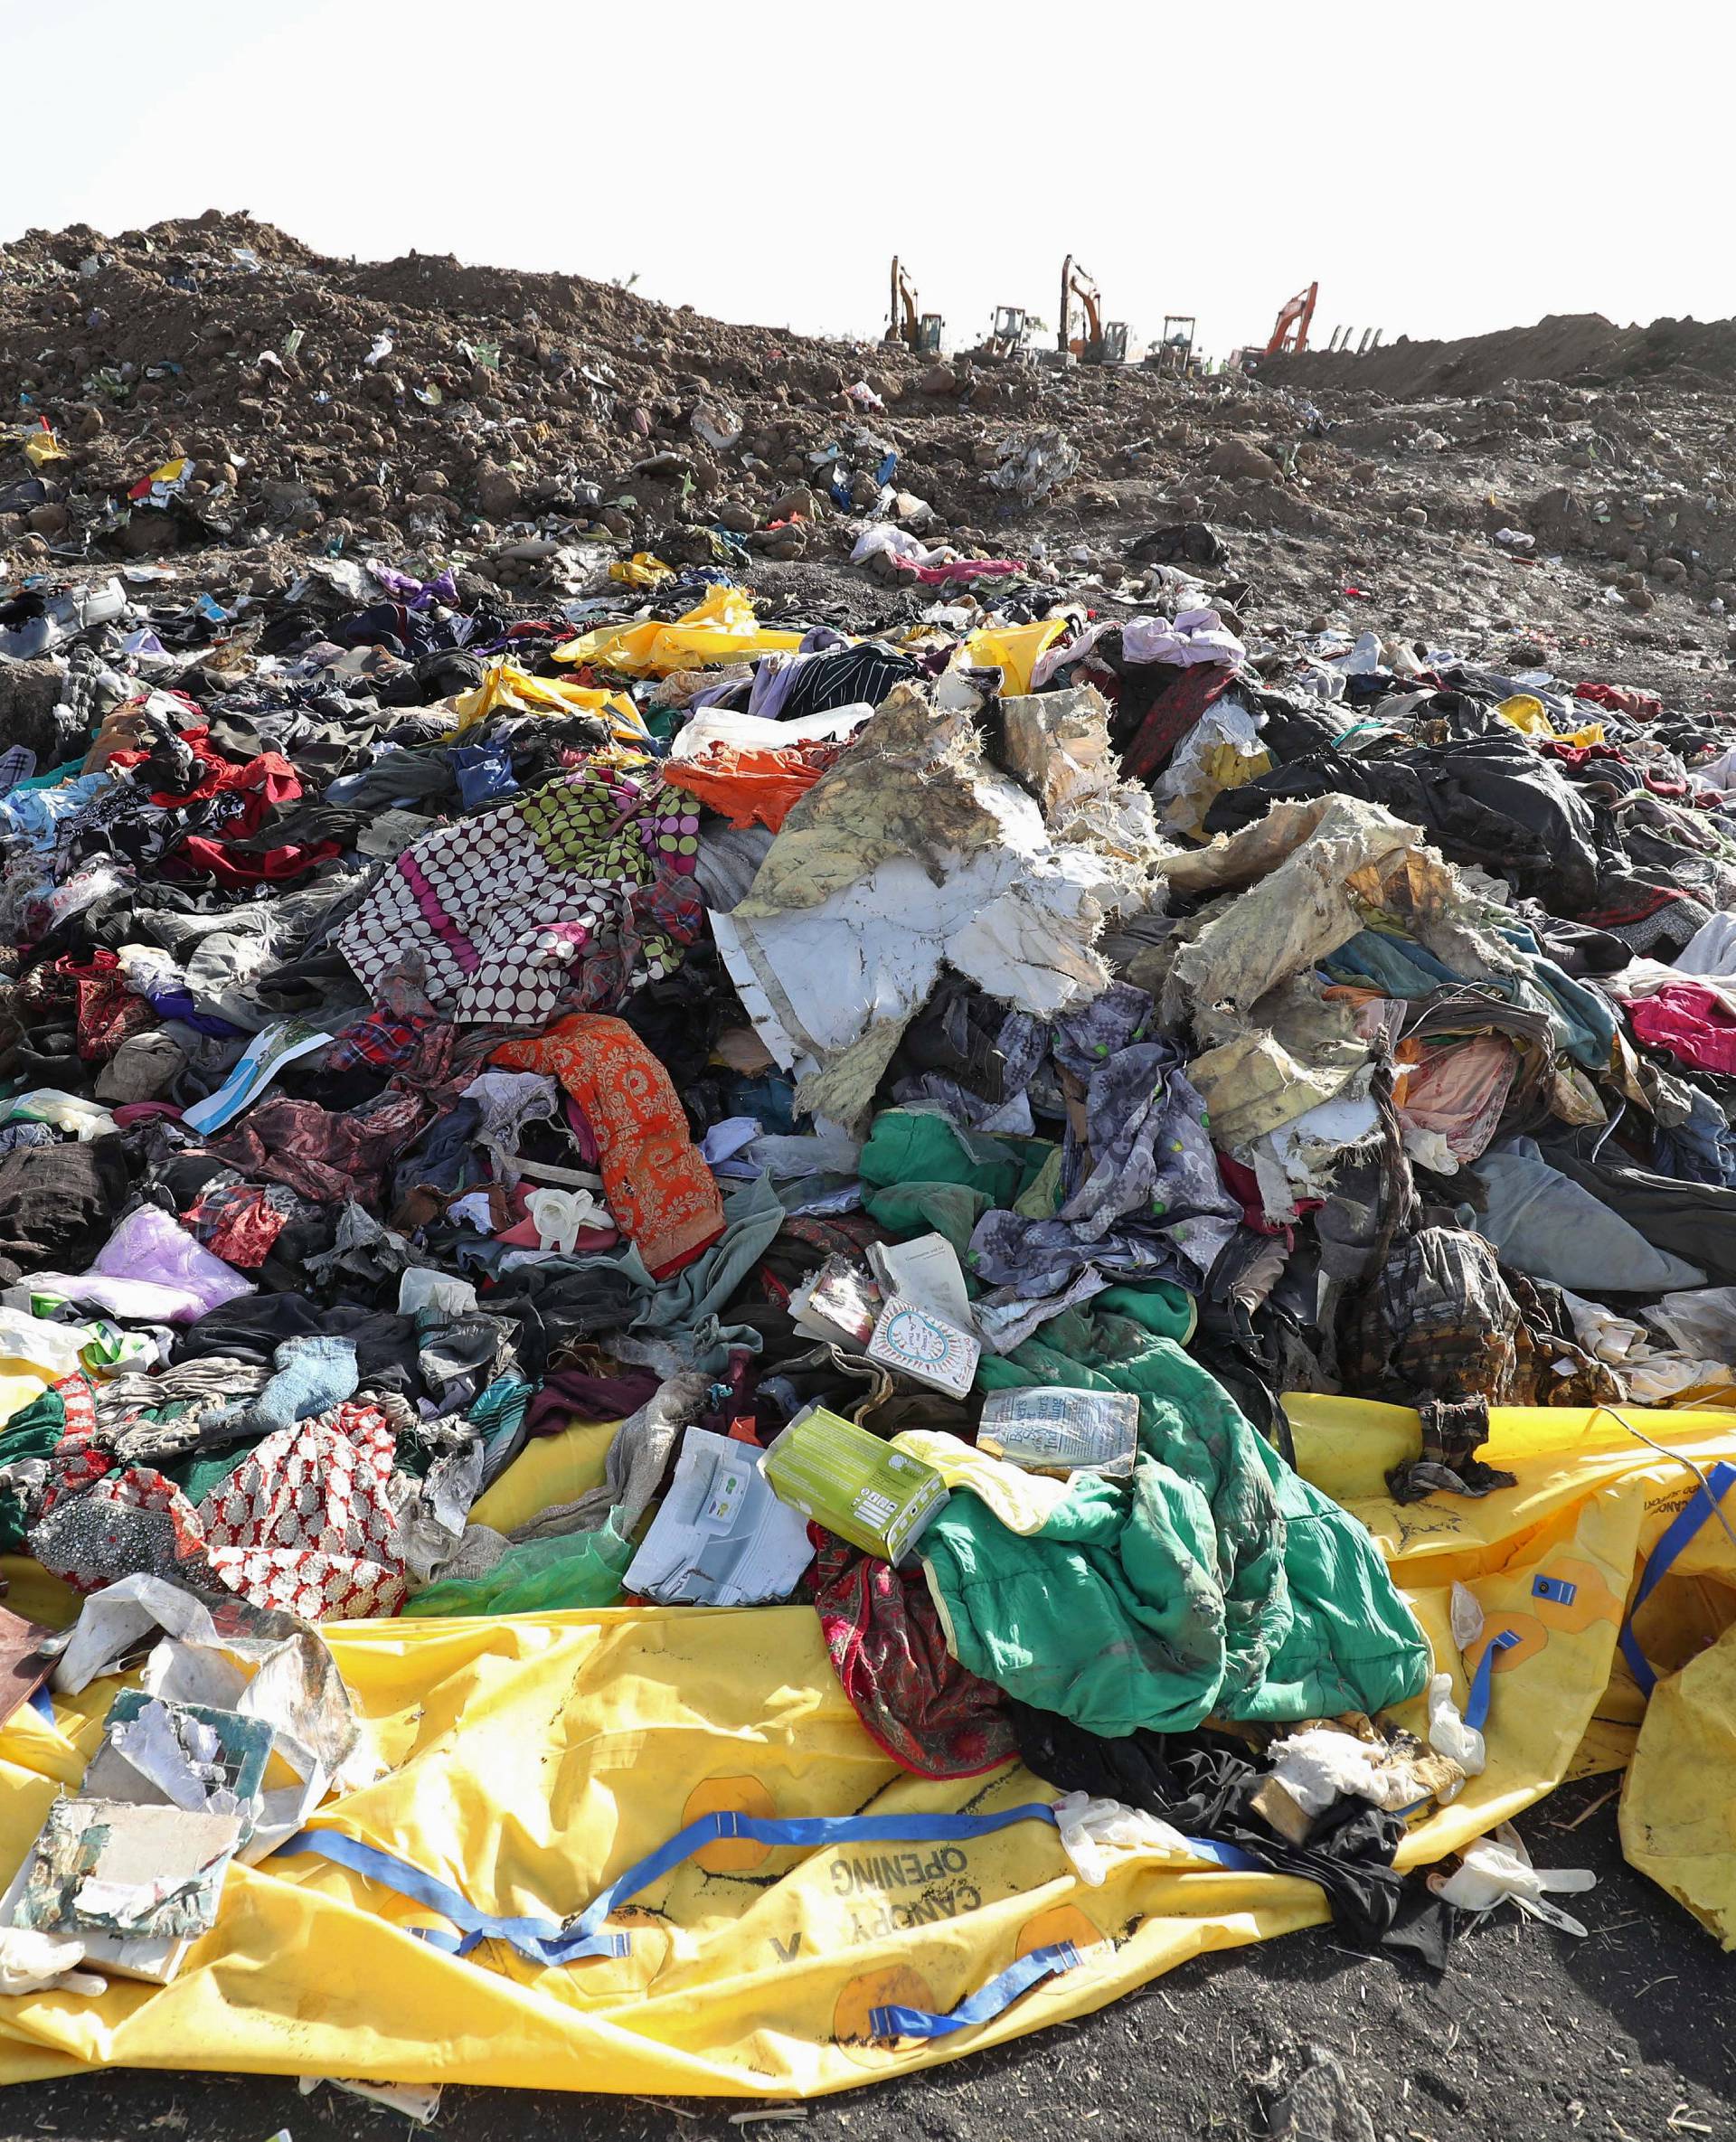 Clothing and personal effects from passengers are seen near the wreckage at the scene of the Ethiopian Airlines Flight ET 302 plane crash, near the town of Bishoftu, southeast of Addis Ababa